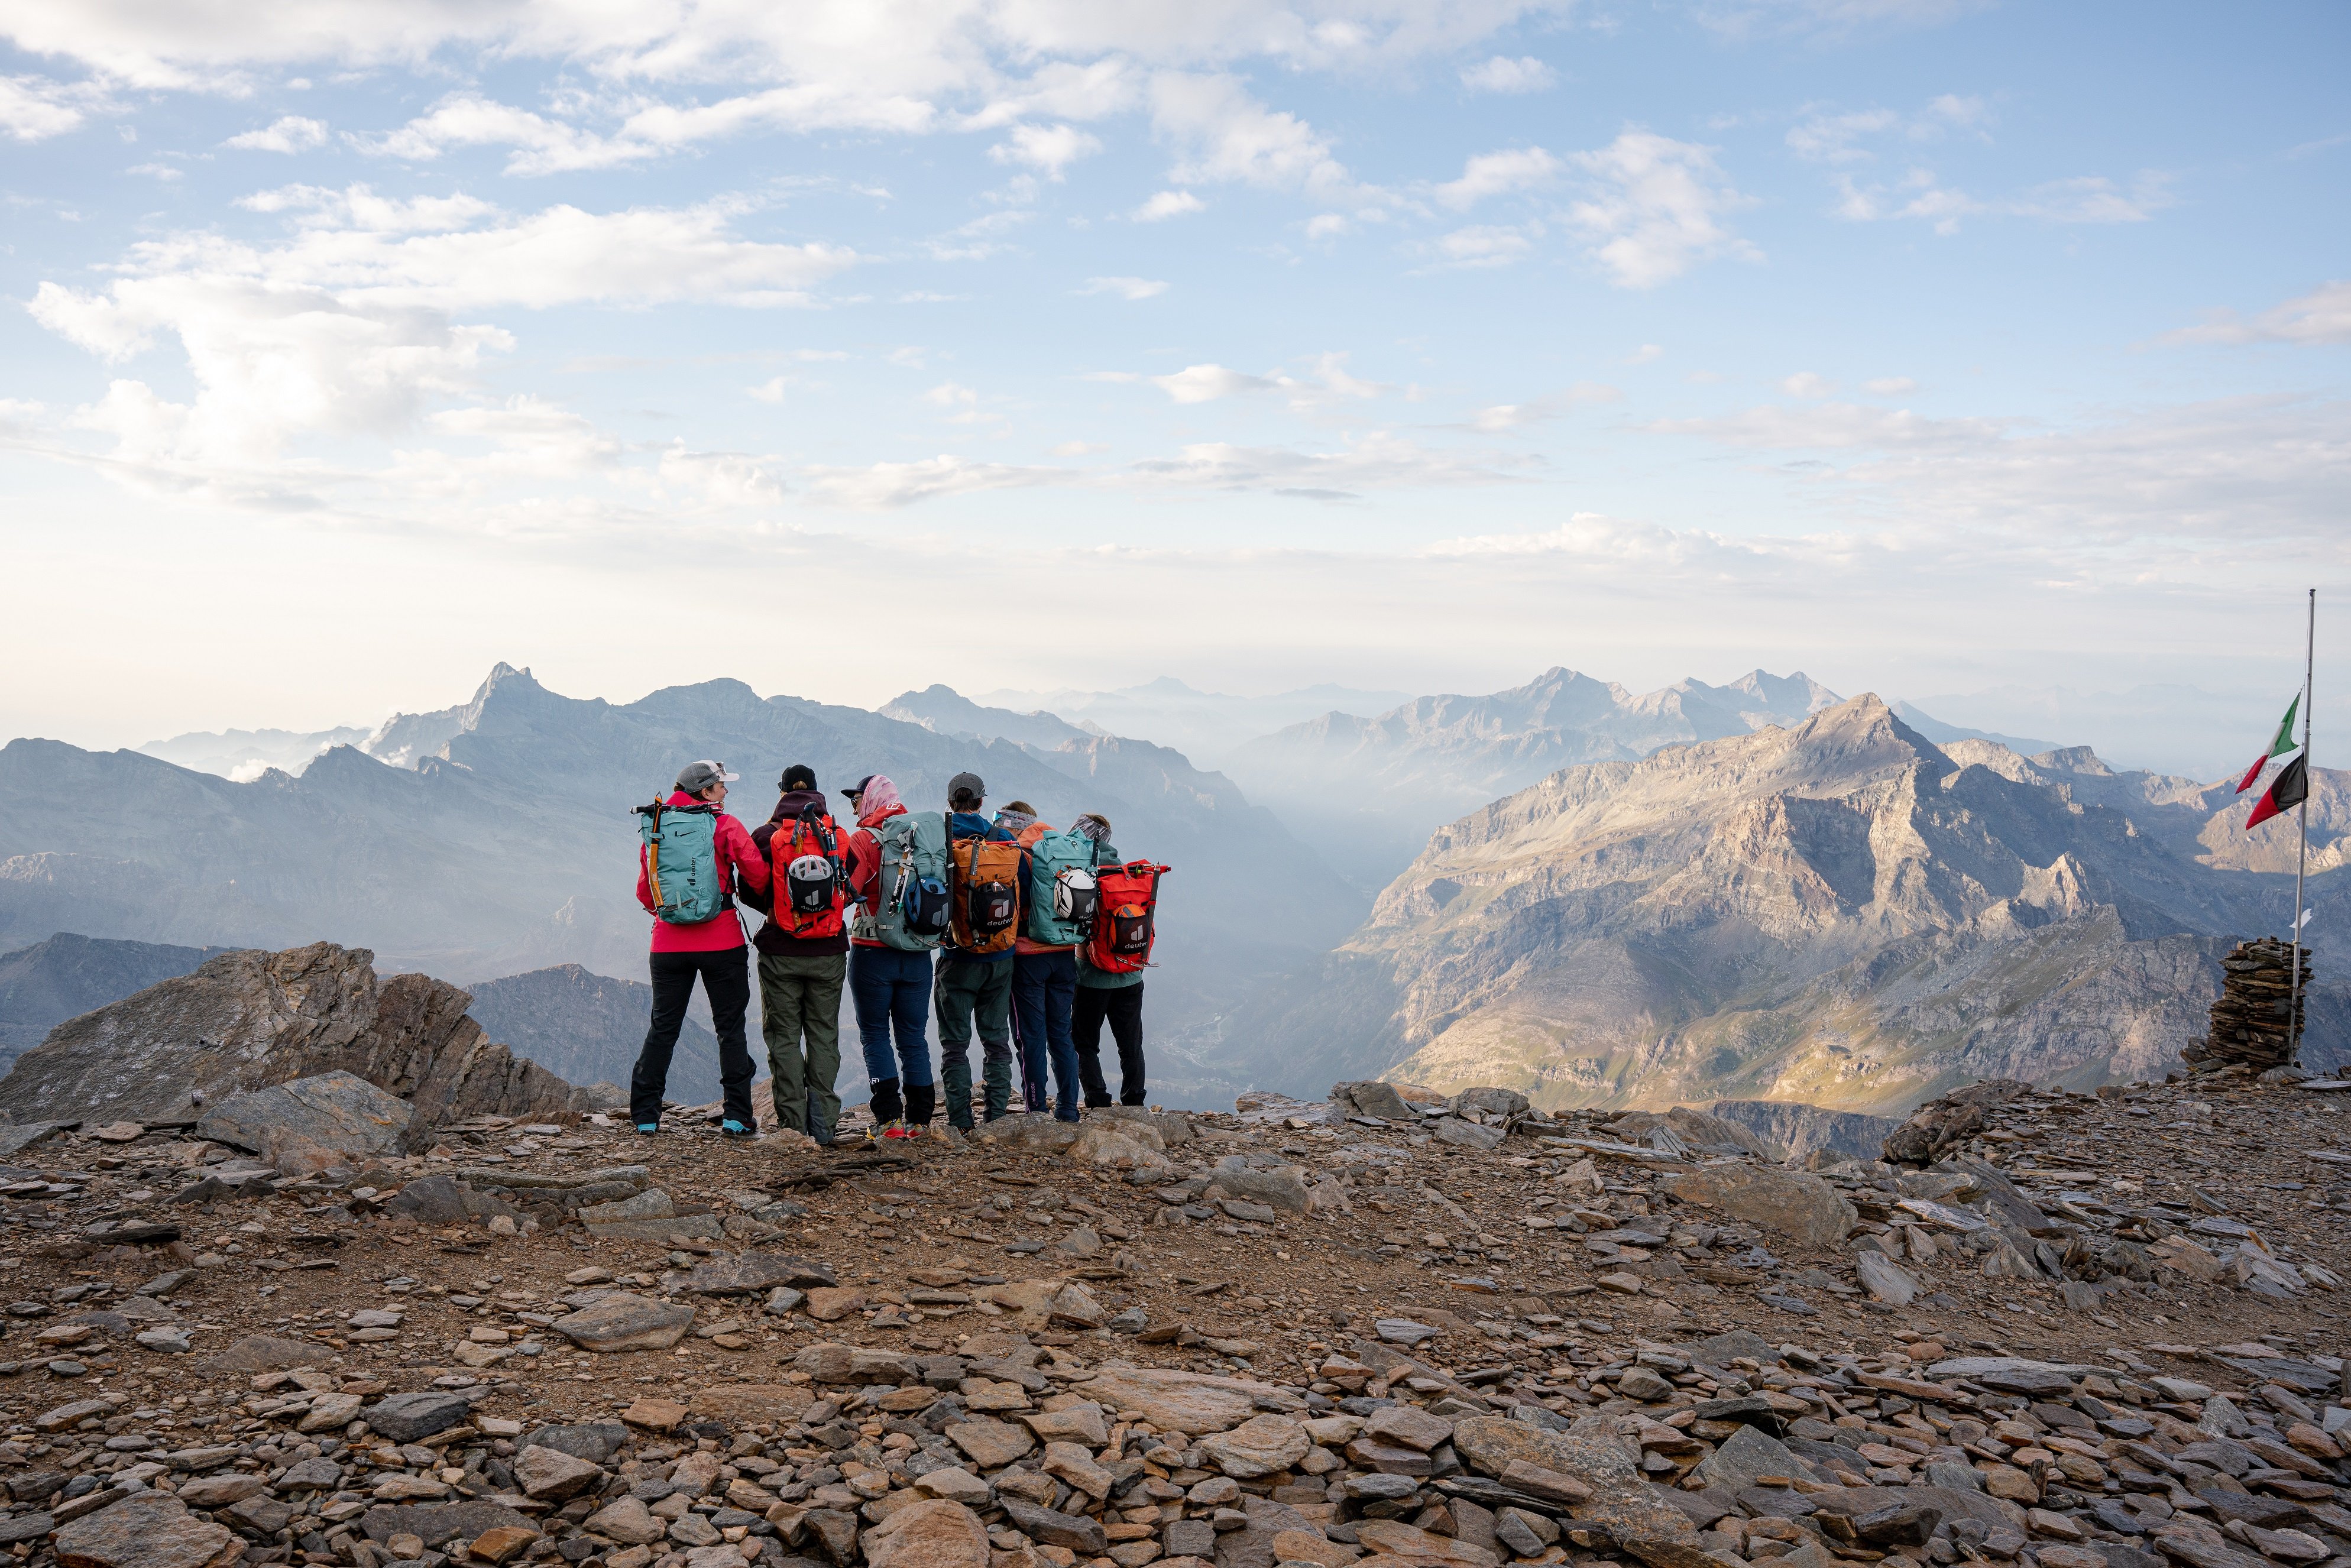 6 hikers look out at the mountain scenery 